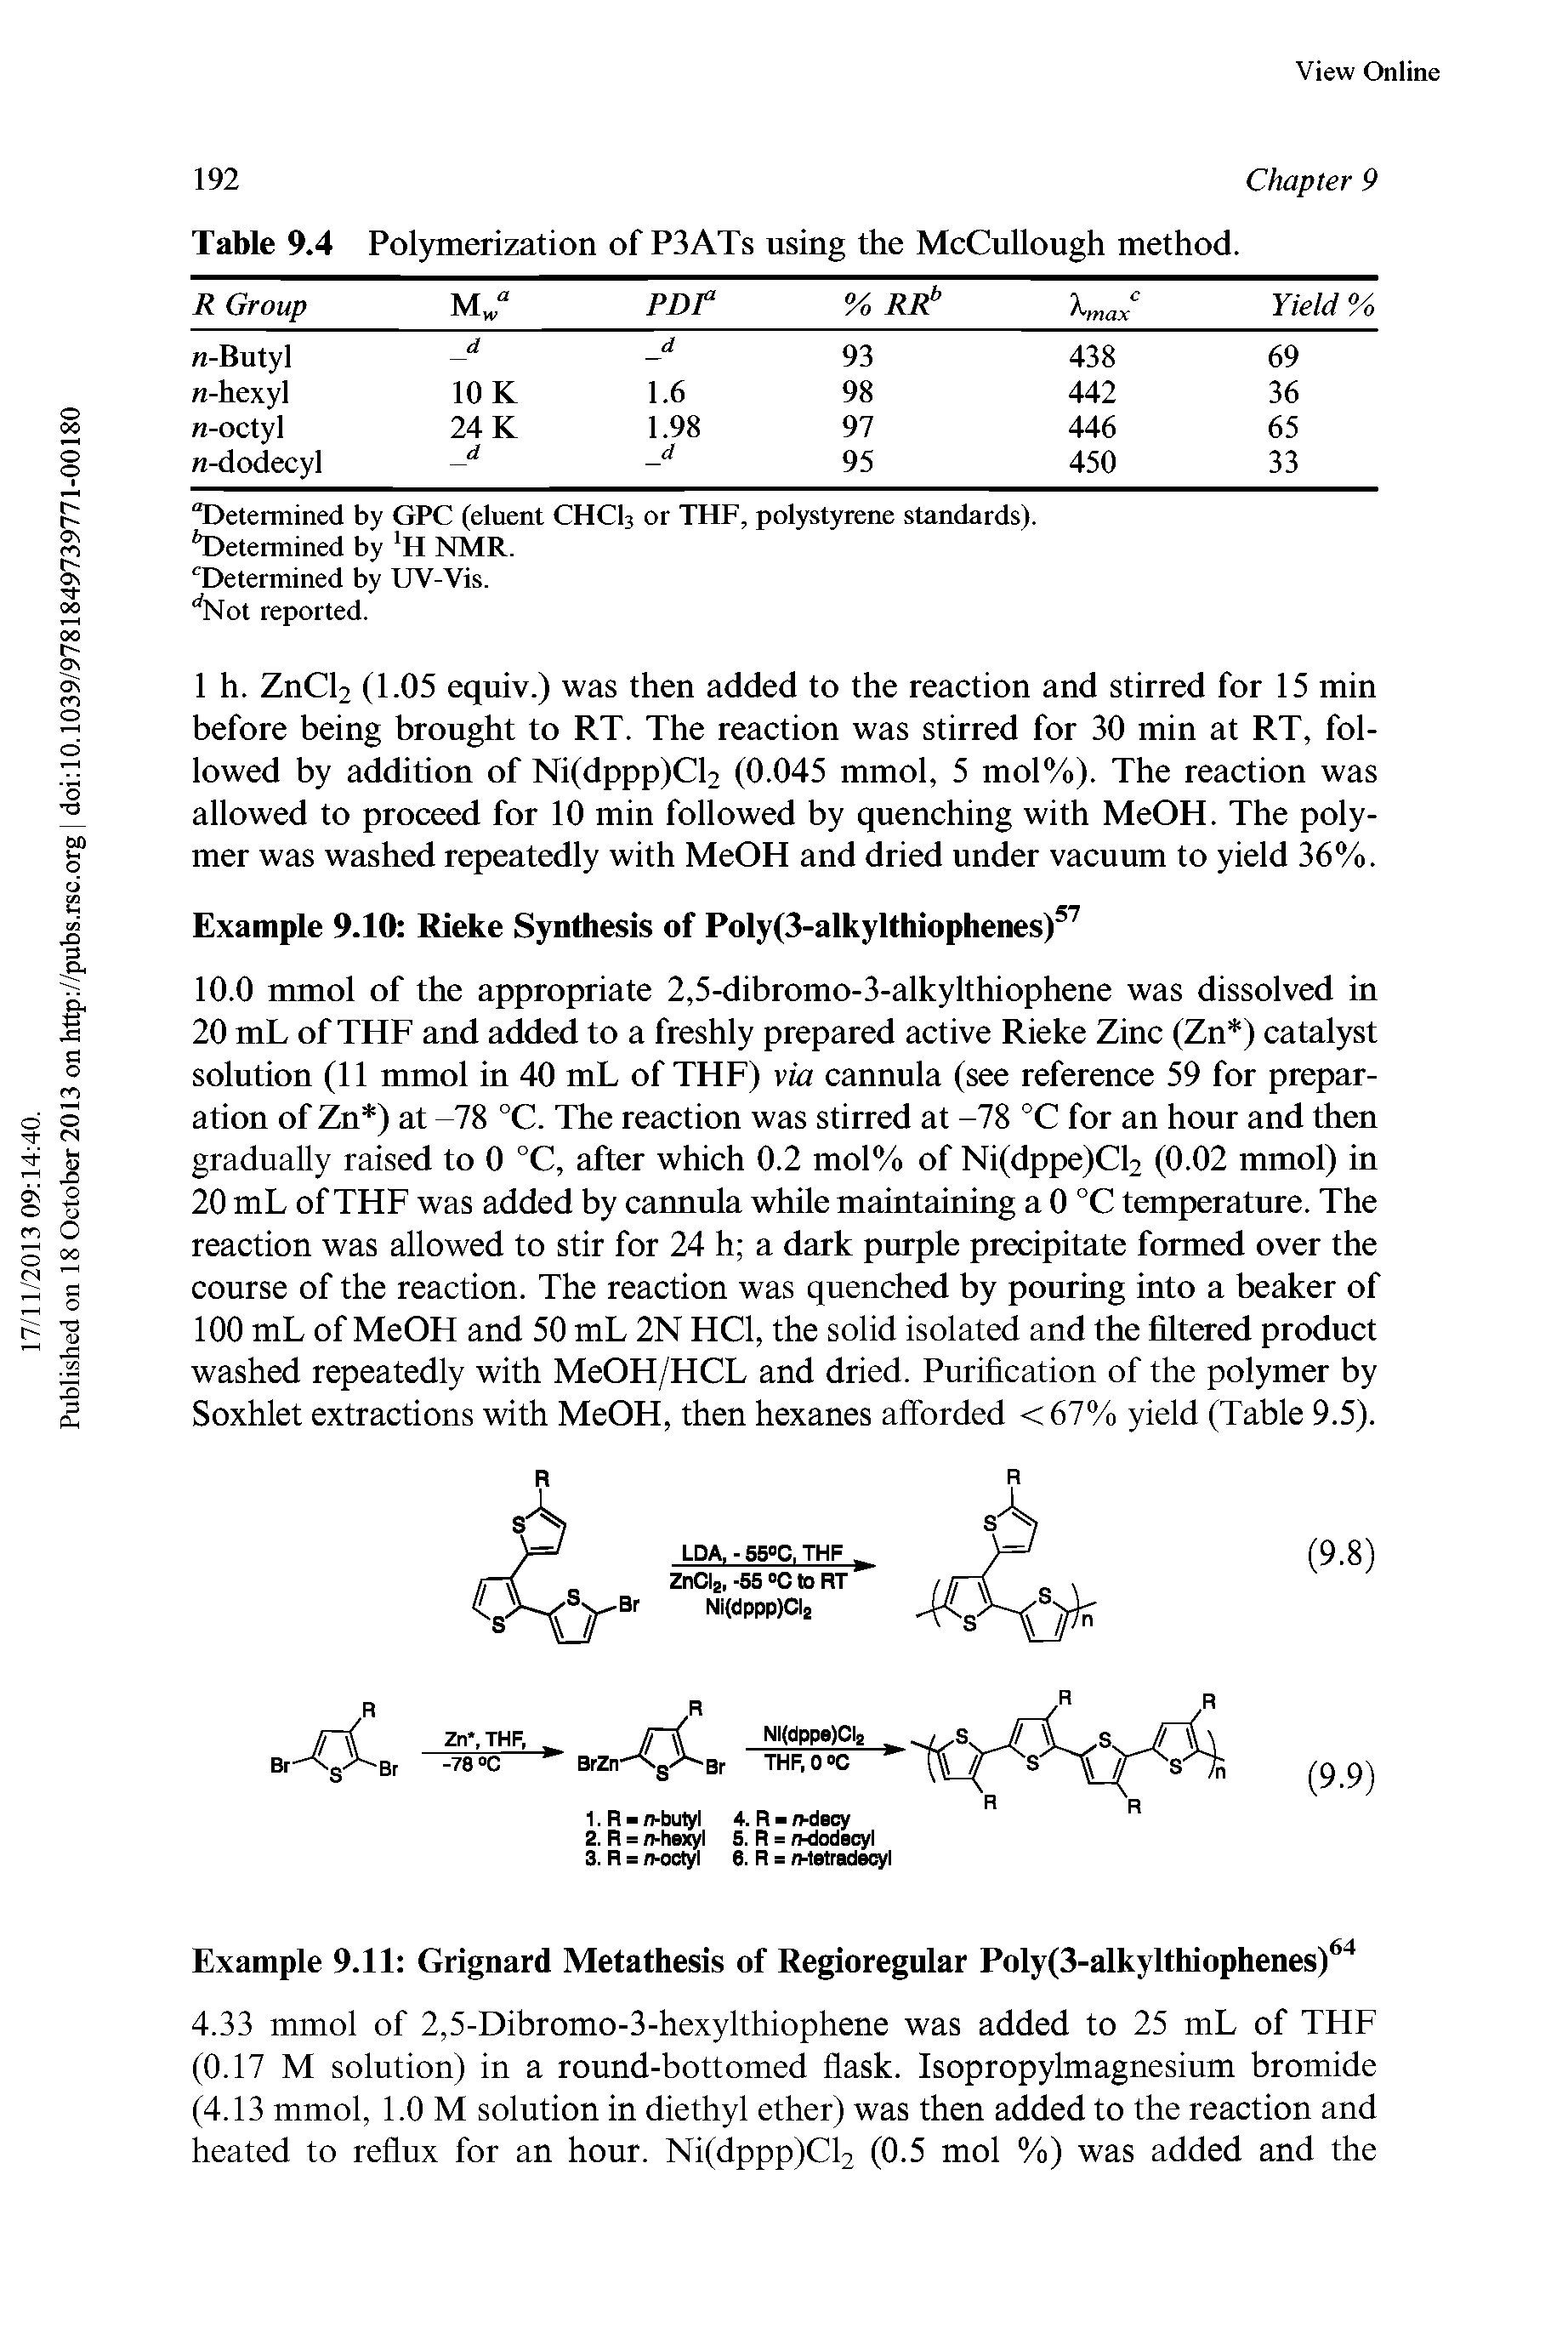 Table 9.4 Polymerization of P3ATs using the McCullough method.